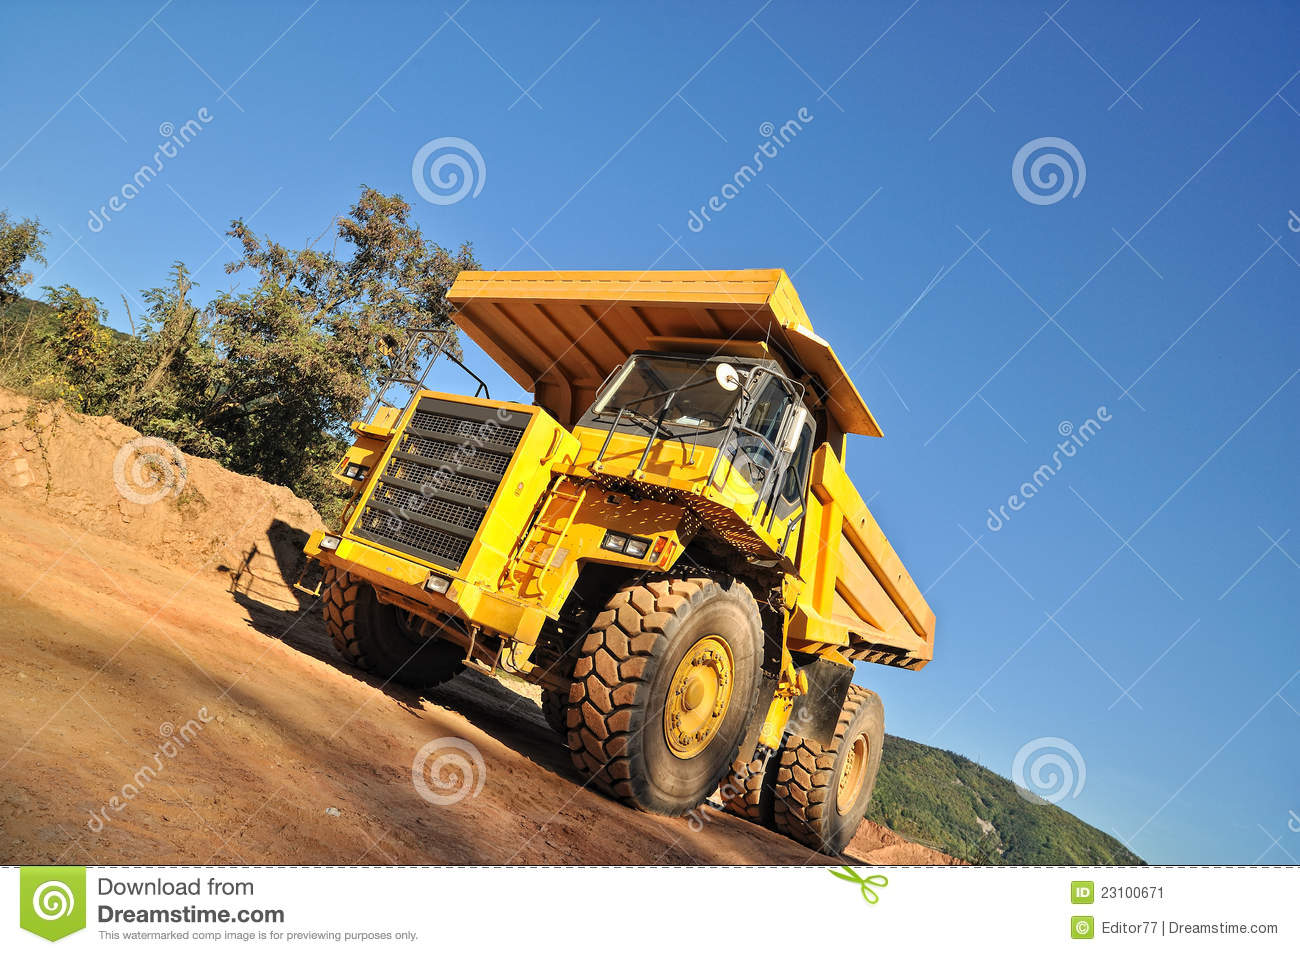 Tipper Truck Near Construction Site With Hill Covered By Forest In